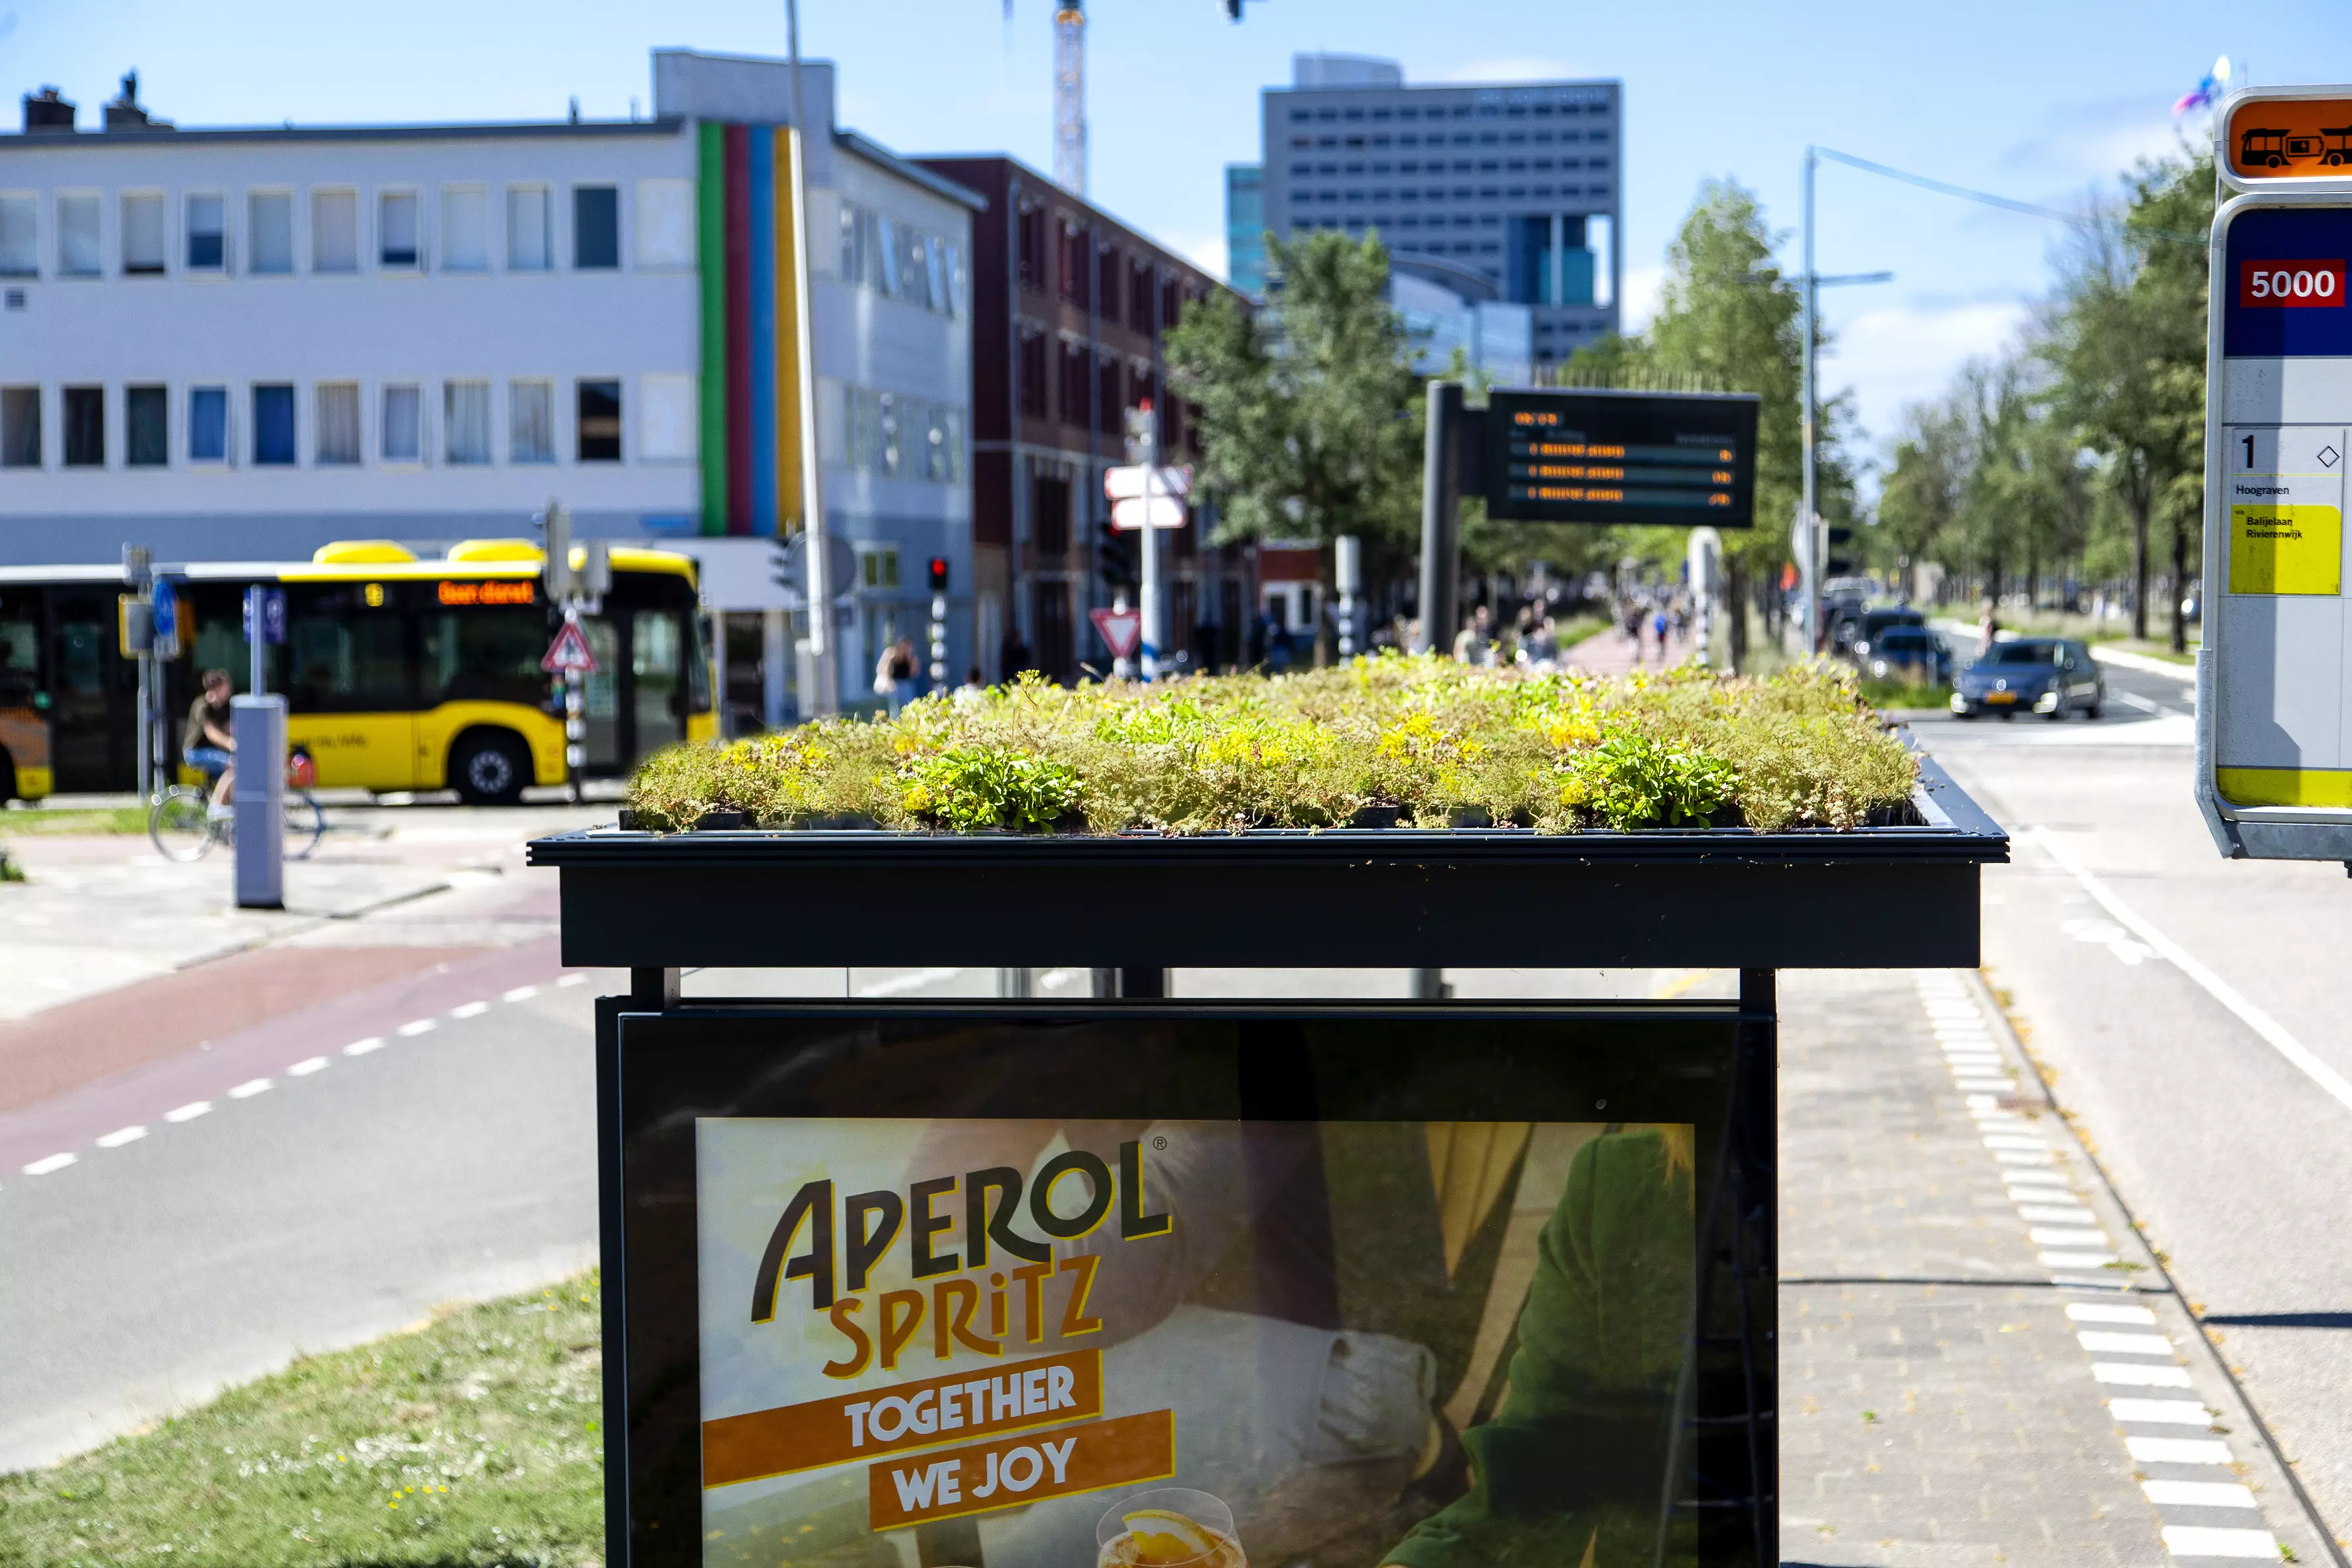 Utrecht became the first city to launch the ambitious eco-friendly project in 2019.